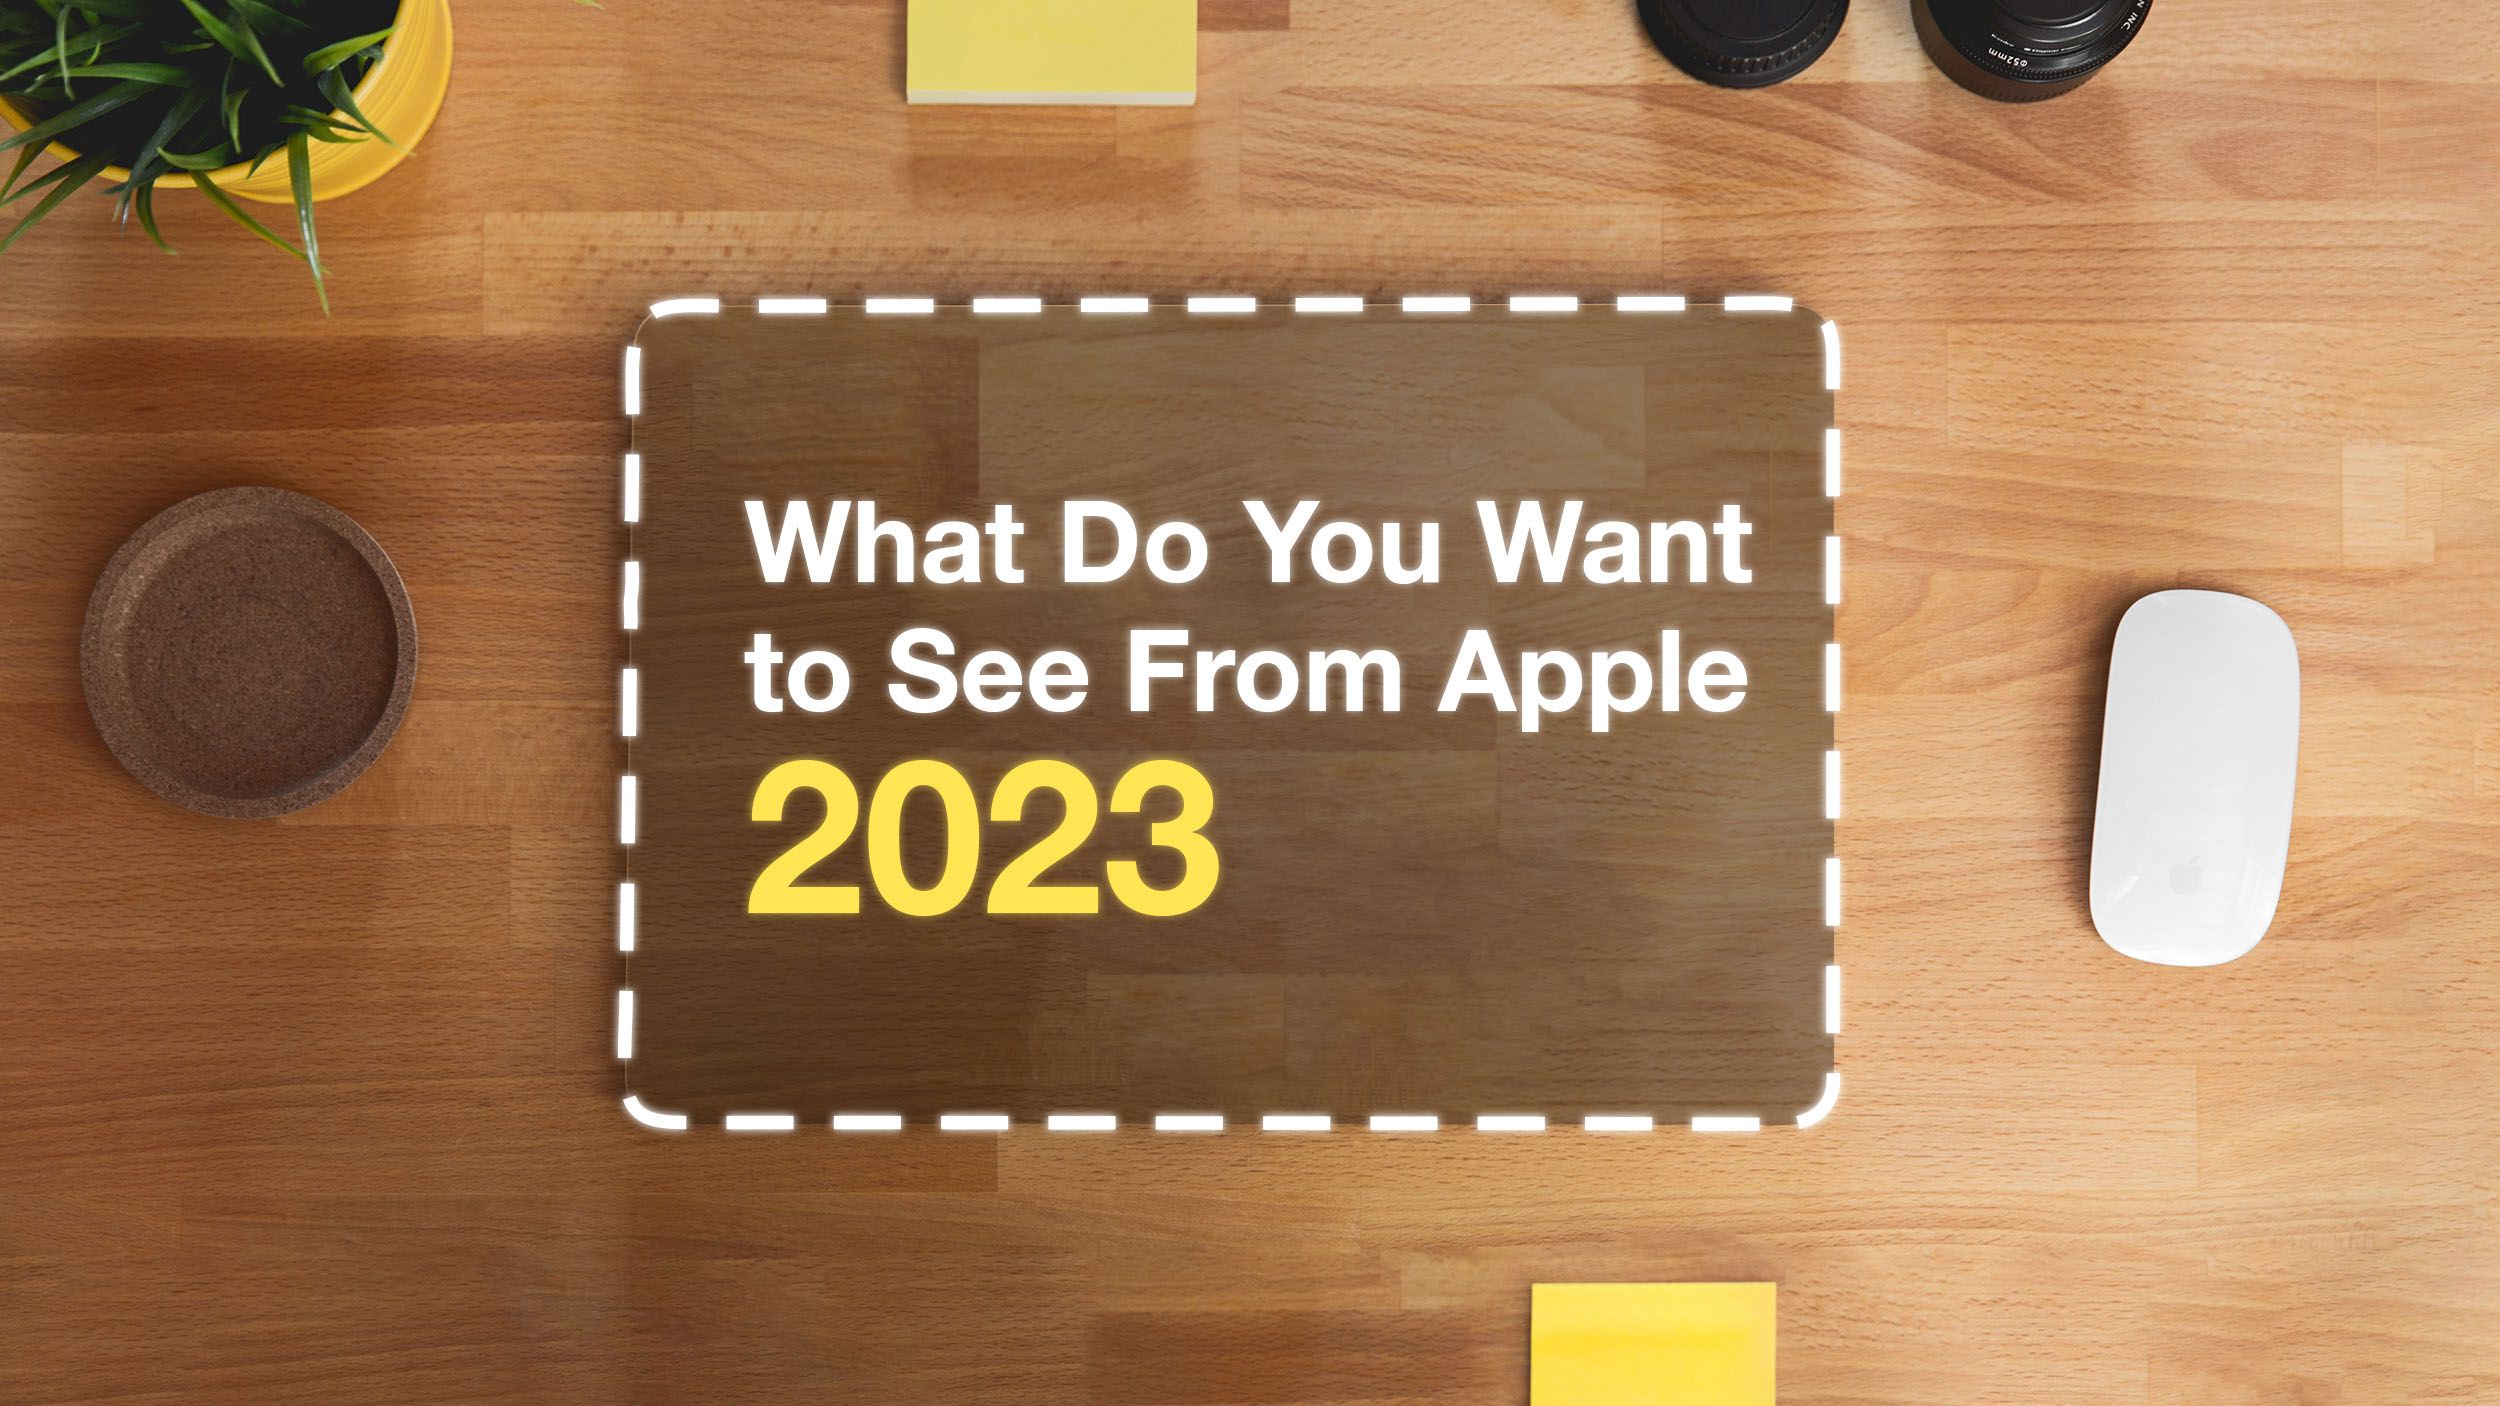 What Do You Want to See From Apple in 2023?